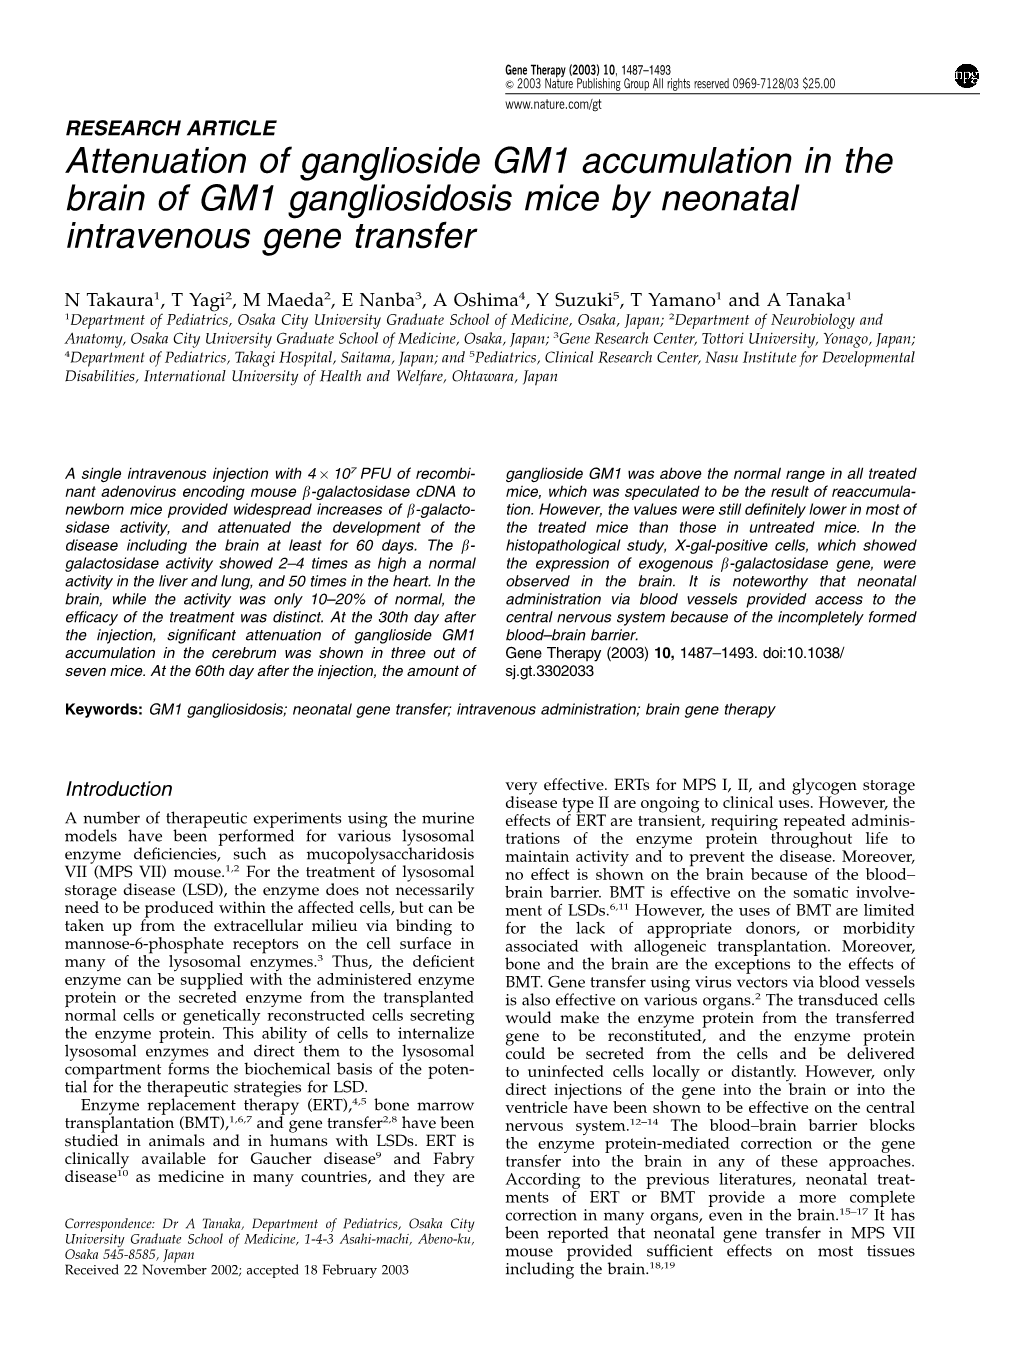 Attenuation of Ganglioside GM1 Accumulation in the Brain of GM1 Gangliosidosis Mice by Neonatal Intravenous Gene Transfer